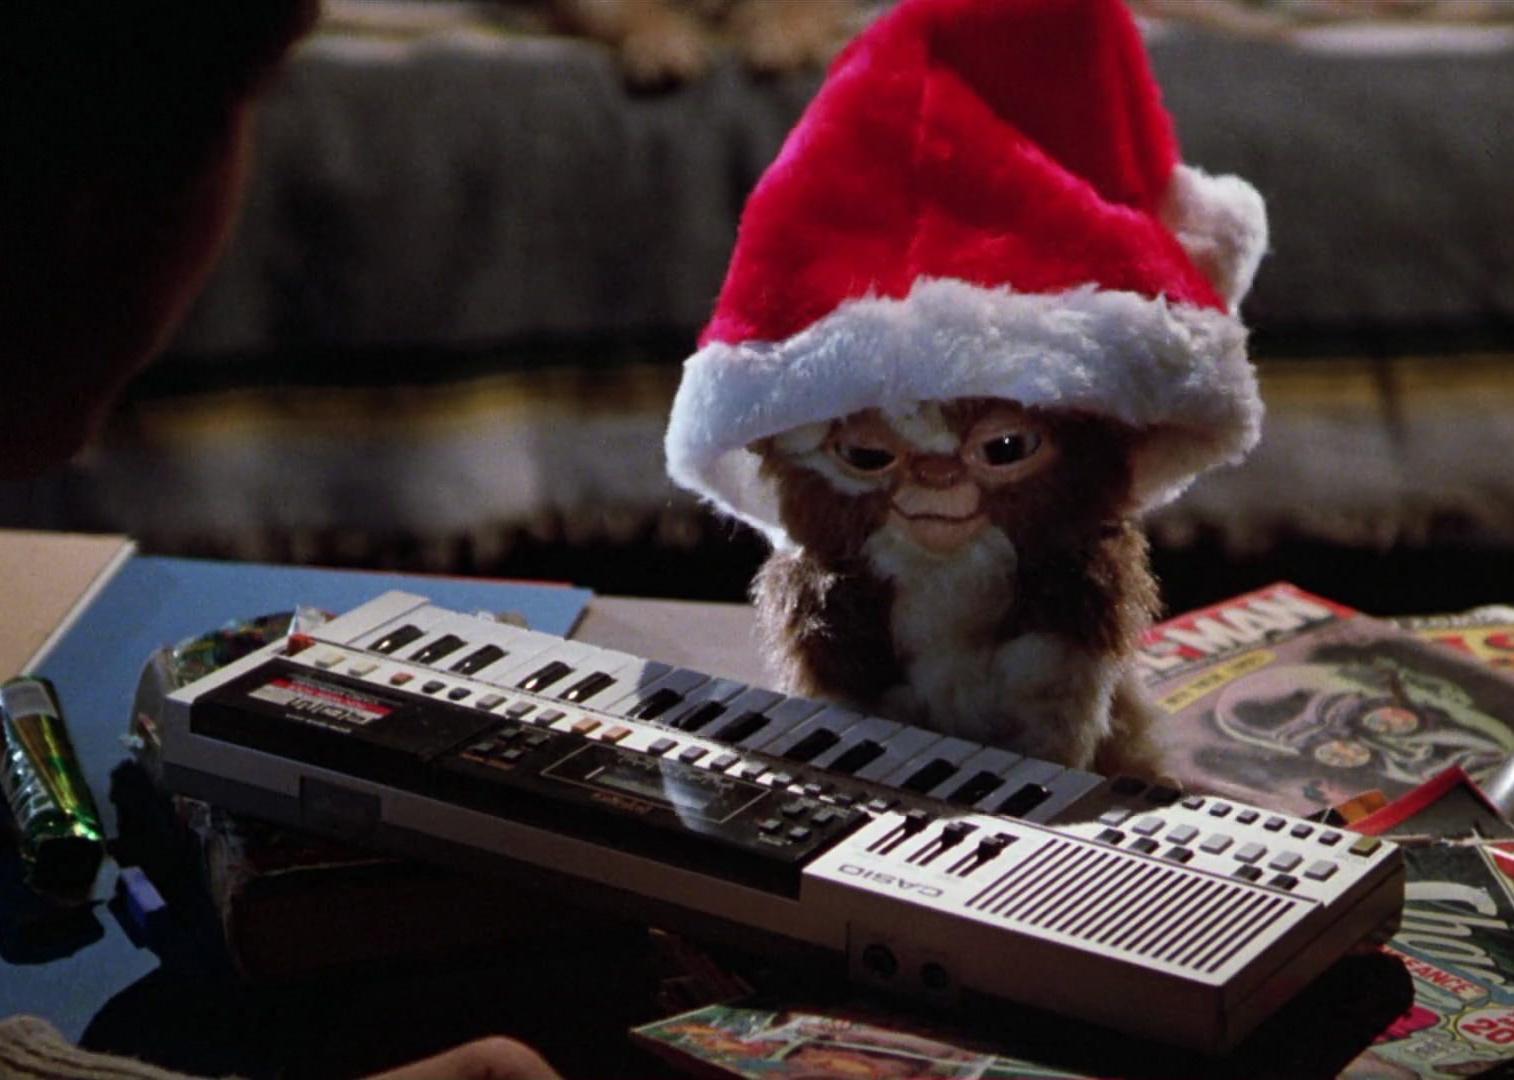 A small creature in a santa hat playing a keyboard.